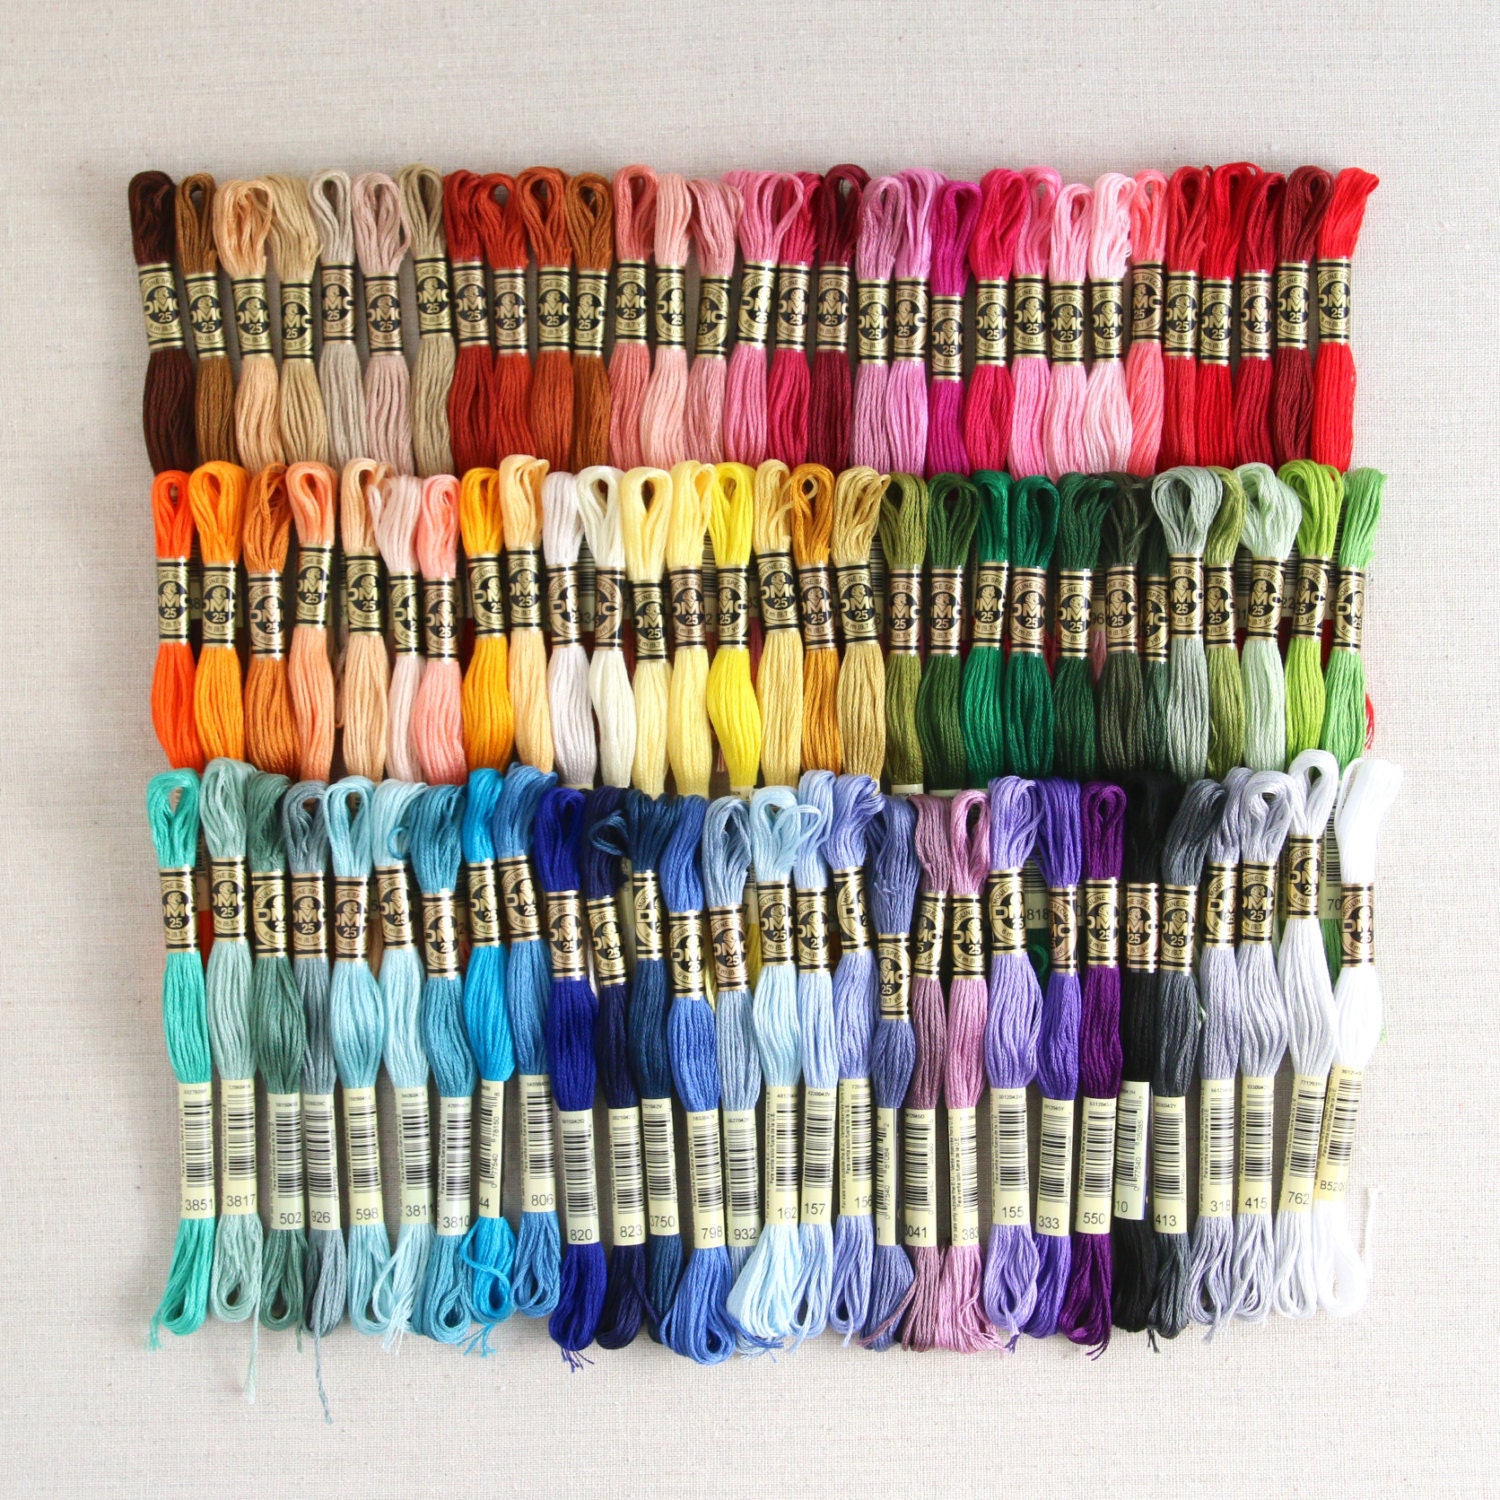 9 Vibrant Colors Metallic Embroidery Floss Pack